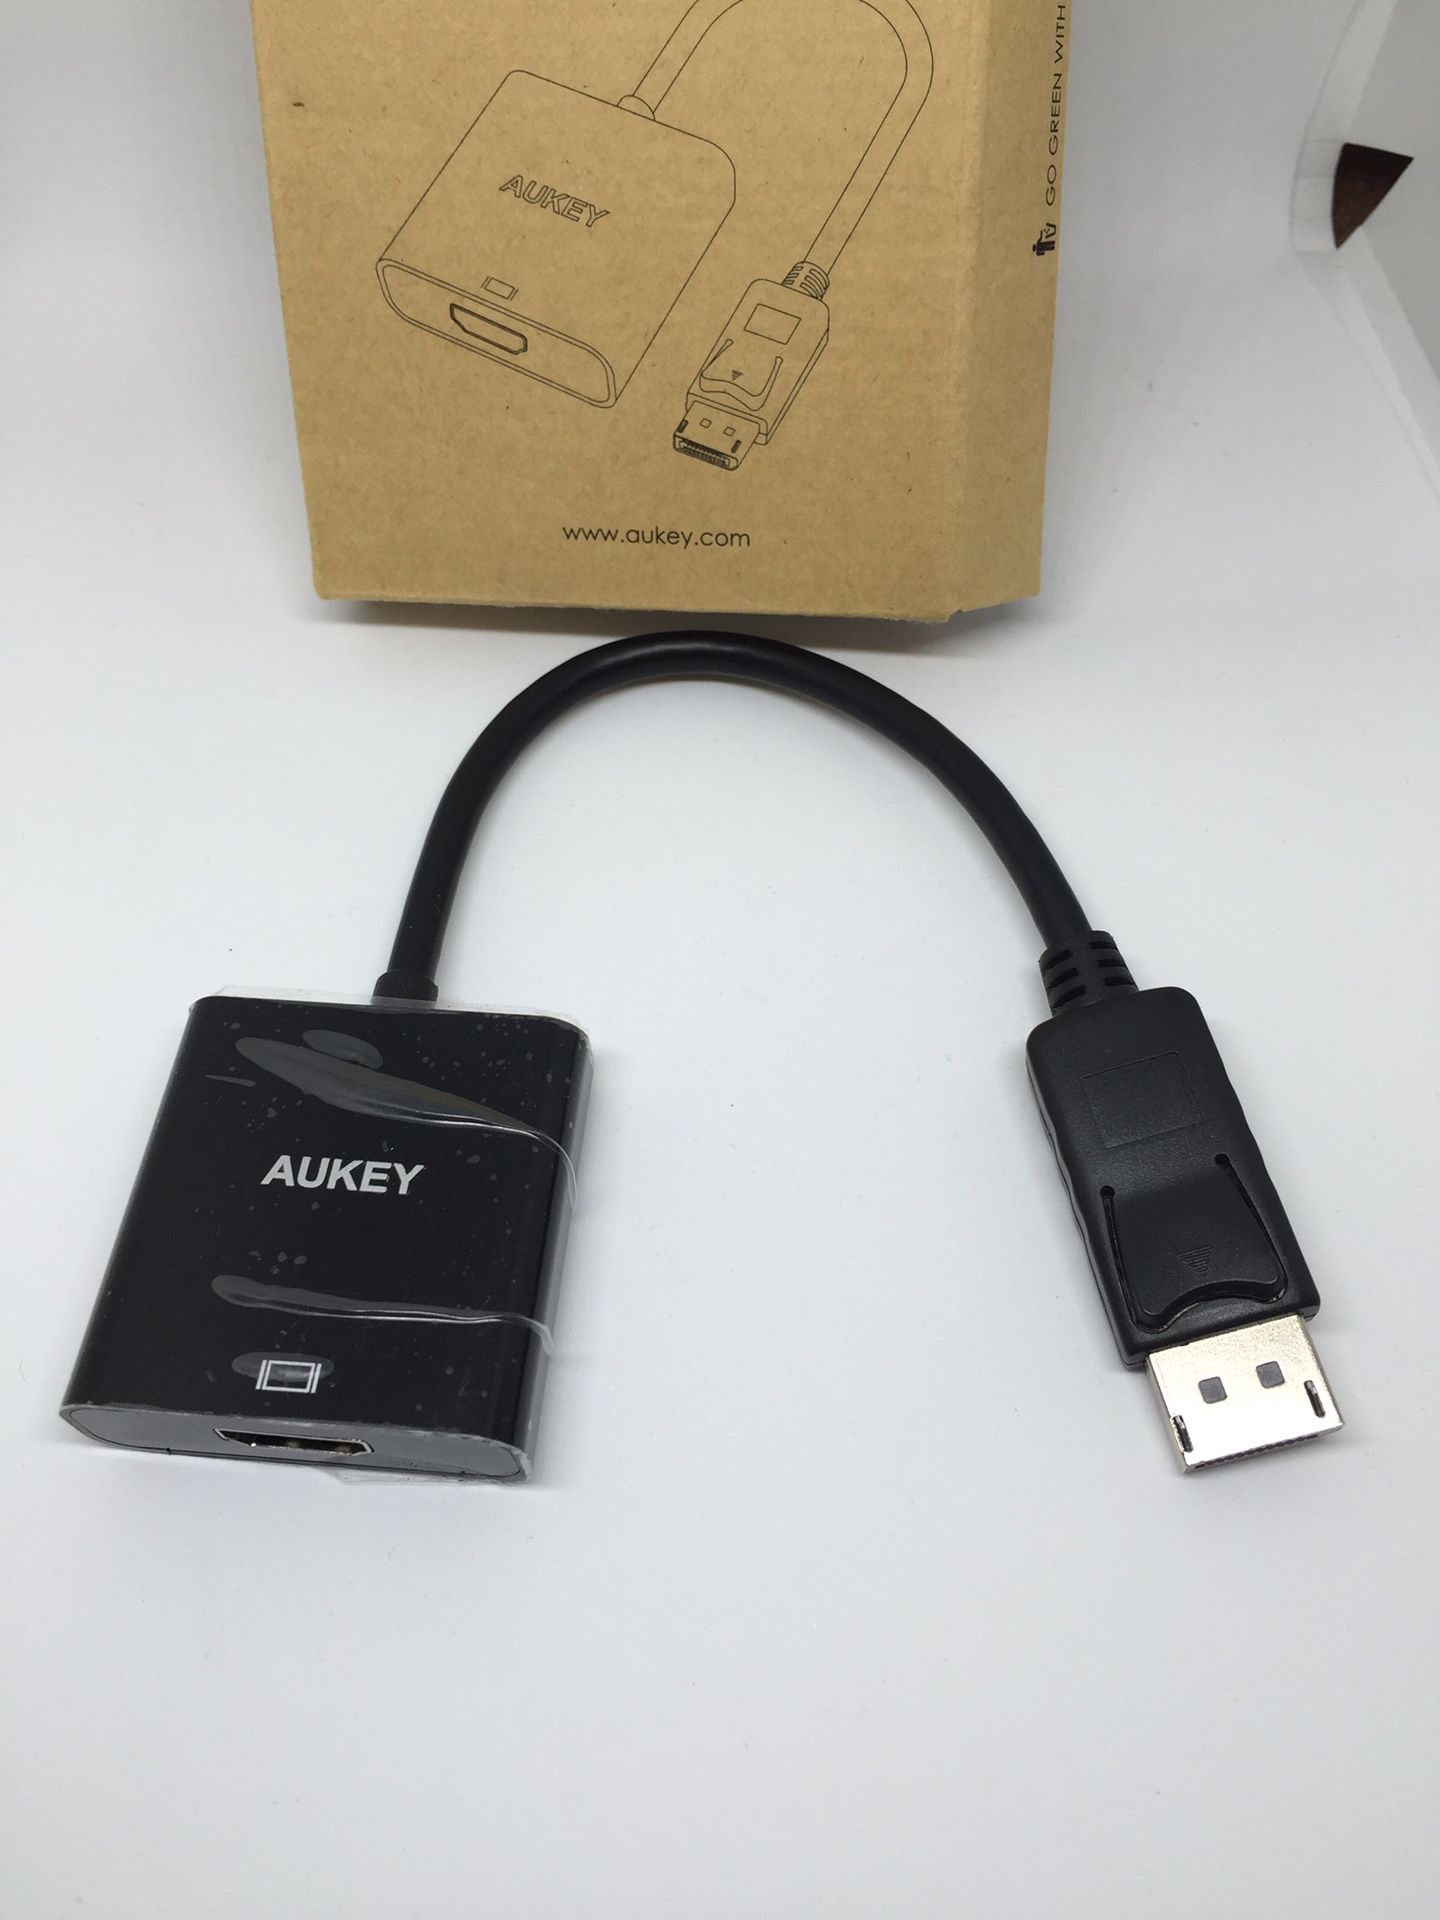 AUKEY DisplayPort (DP) to HDMI Adapter, 1080P for HDTV, Macbook, Chromebook Pixel, (brand new never been use)